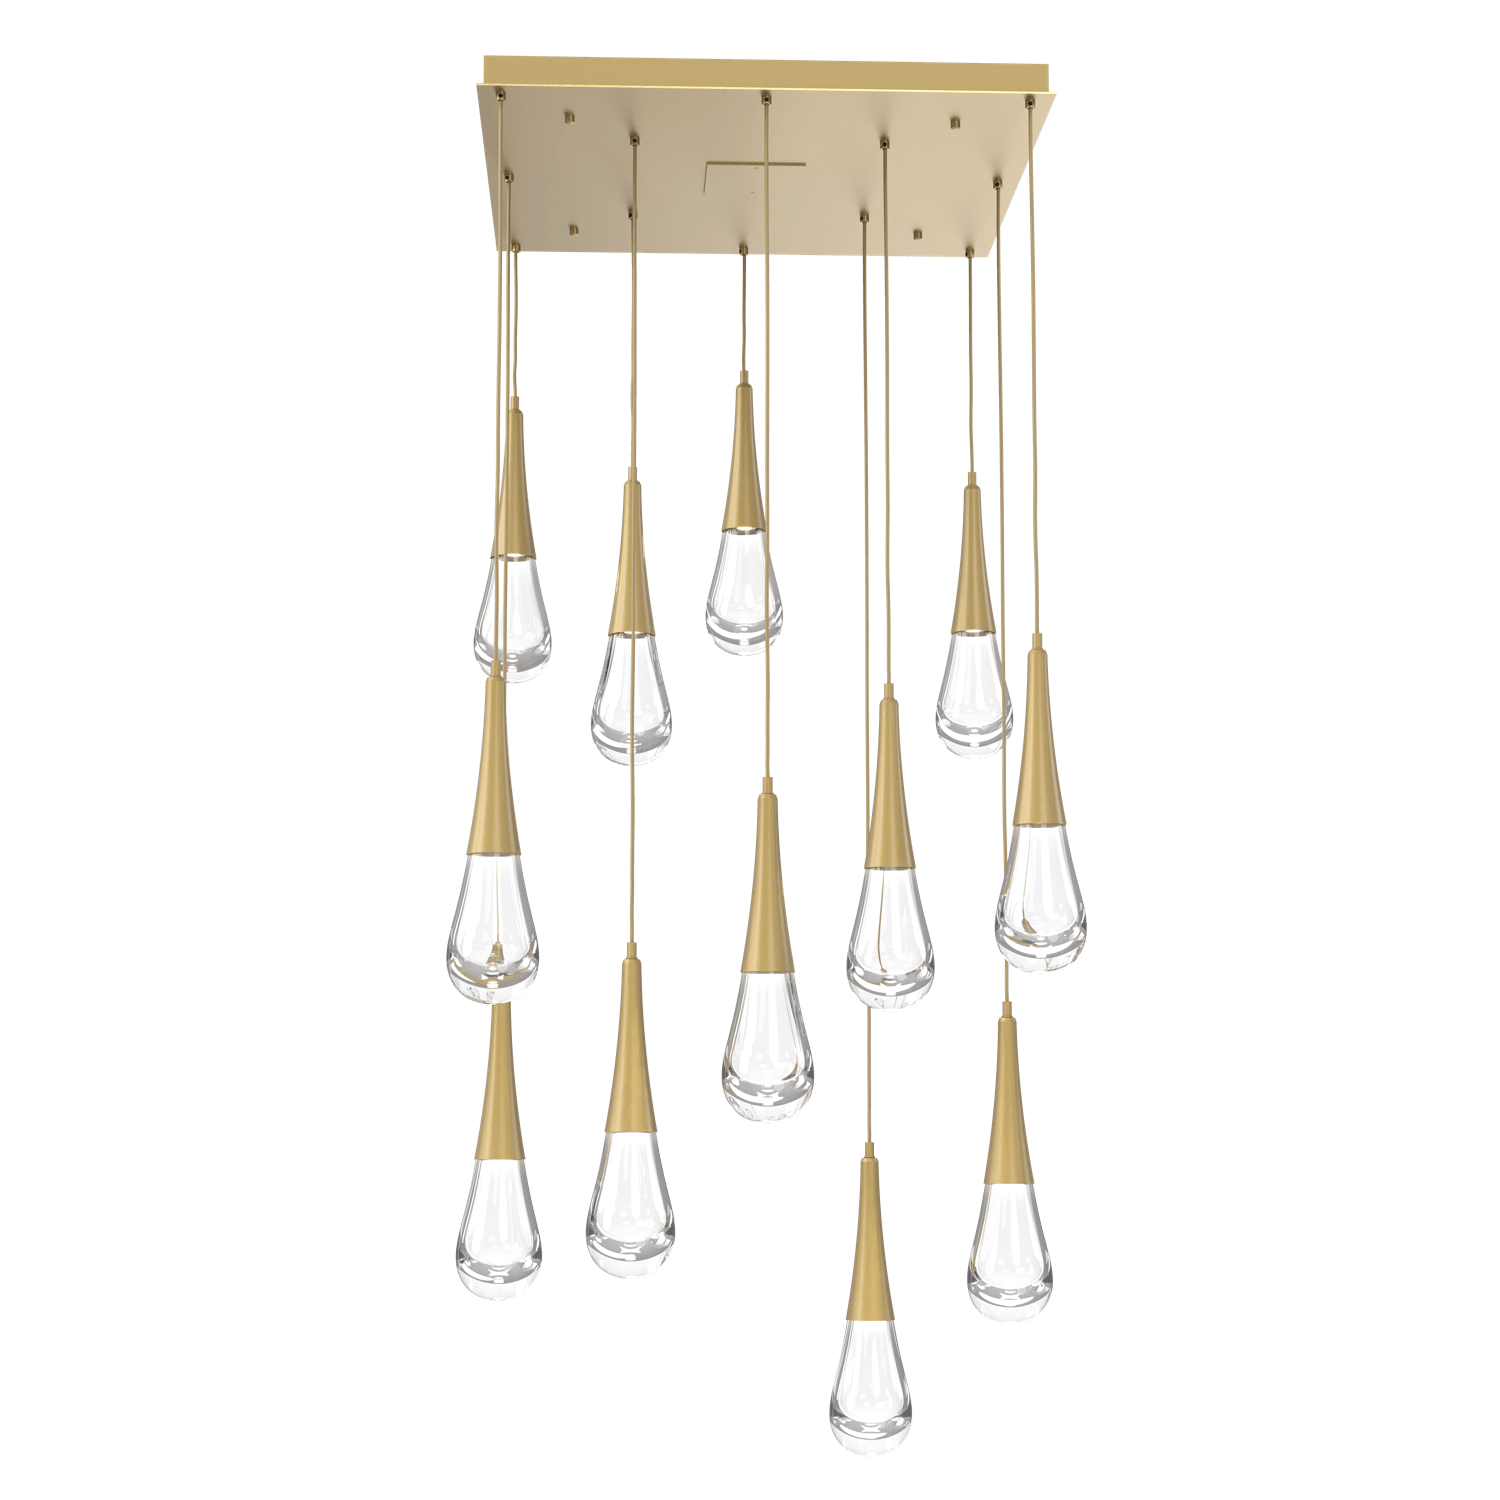 CHB0078-12-GB-Hammerton-Studio-Raindrop-12-light-square-pendant-chandelier-with-gilded-brass-finish-and-clear-blown-glass-shades-and-LED-lamping